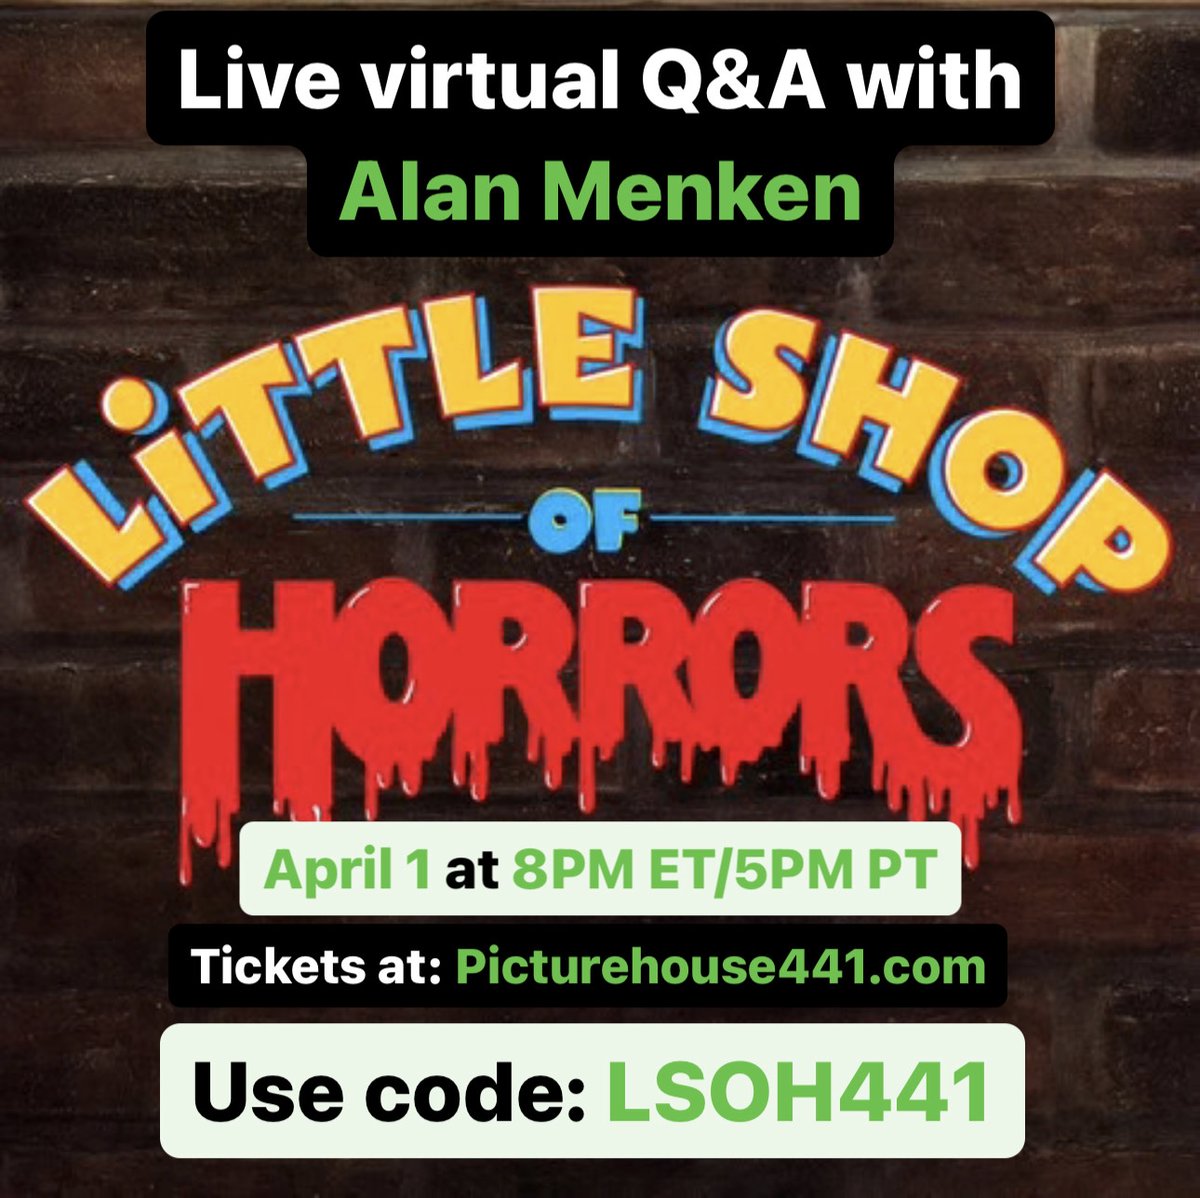 Look out, look out! On the first day of the month of April (April 1 at 8PM ET/5PM PT), I'll be live on Zoom Webinar exploring the process of adapting LITTLE SHOP OF HORRORS for the screen with @picturehouse441! Get discounted tickets with code LSOH441 at picturehouse441.com/event/littlesh…